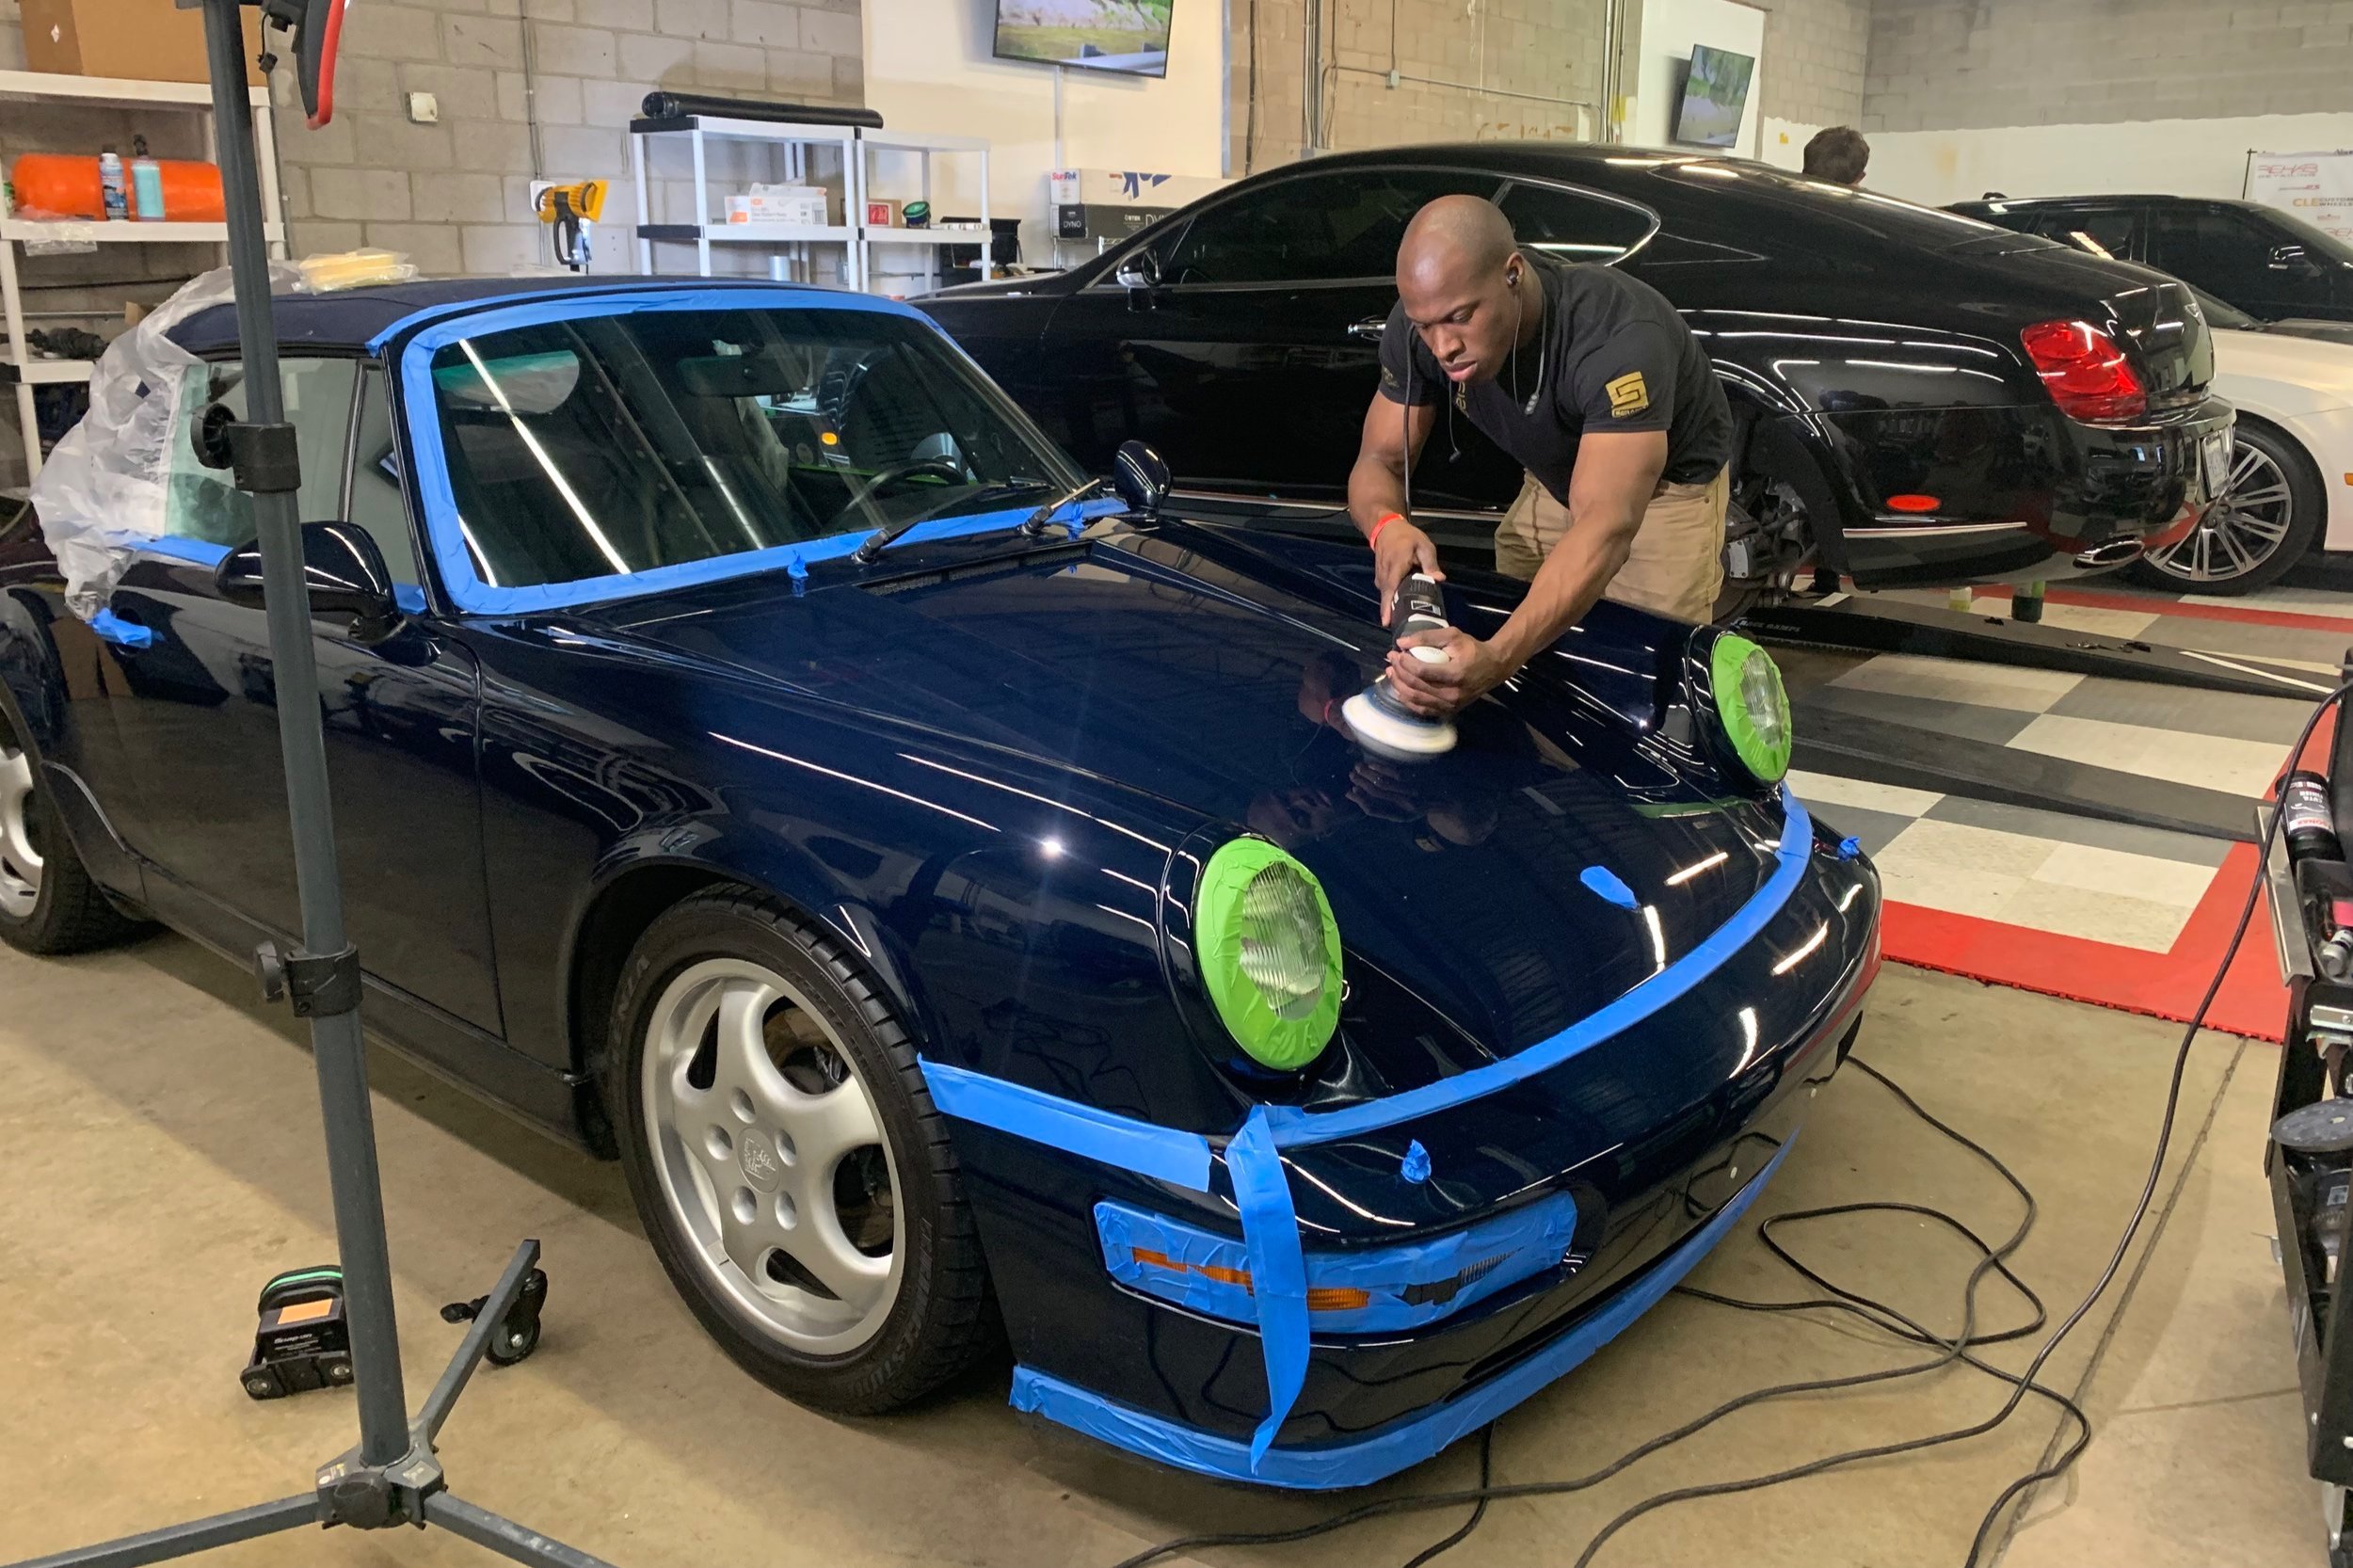 Paint Protection Film in Mentor, OH - Rhino Mobile Detailing